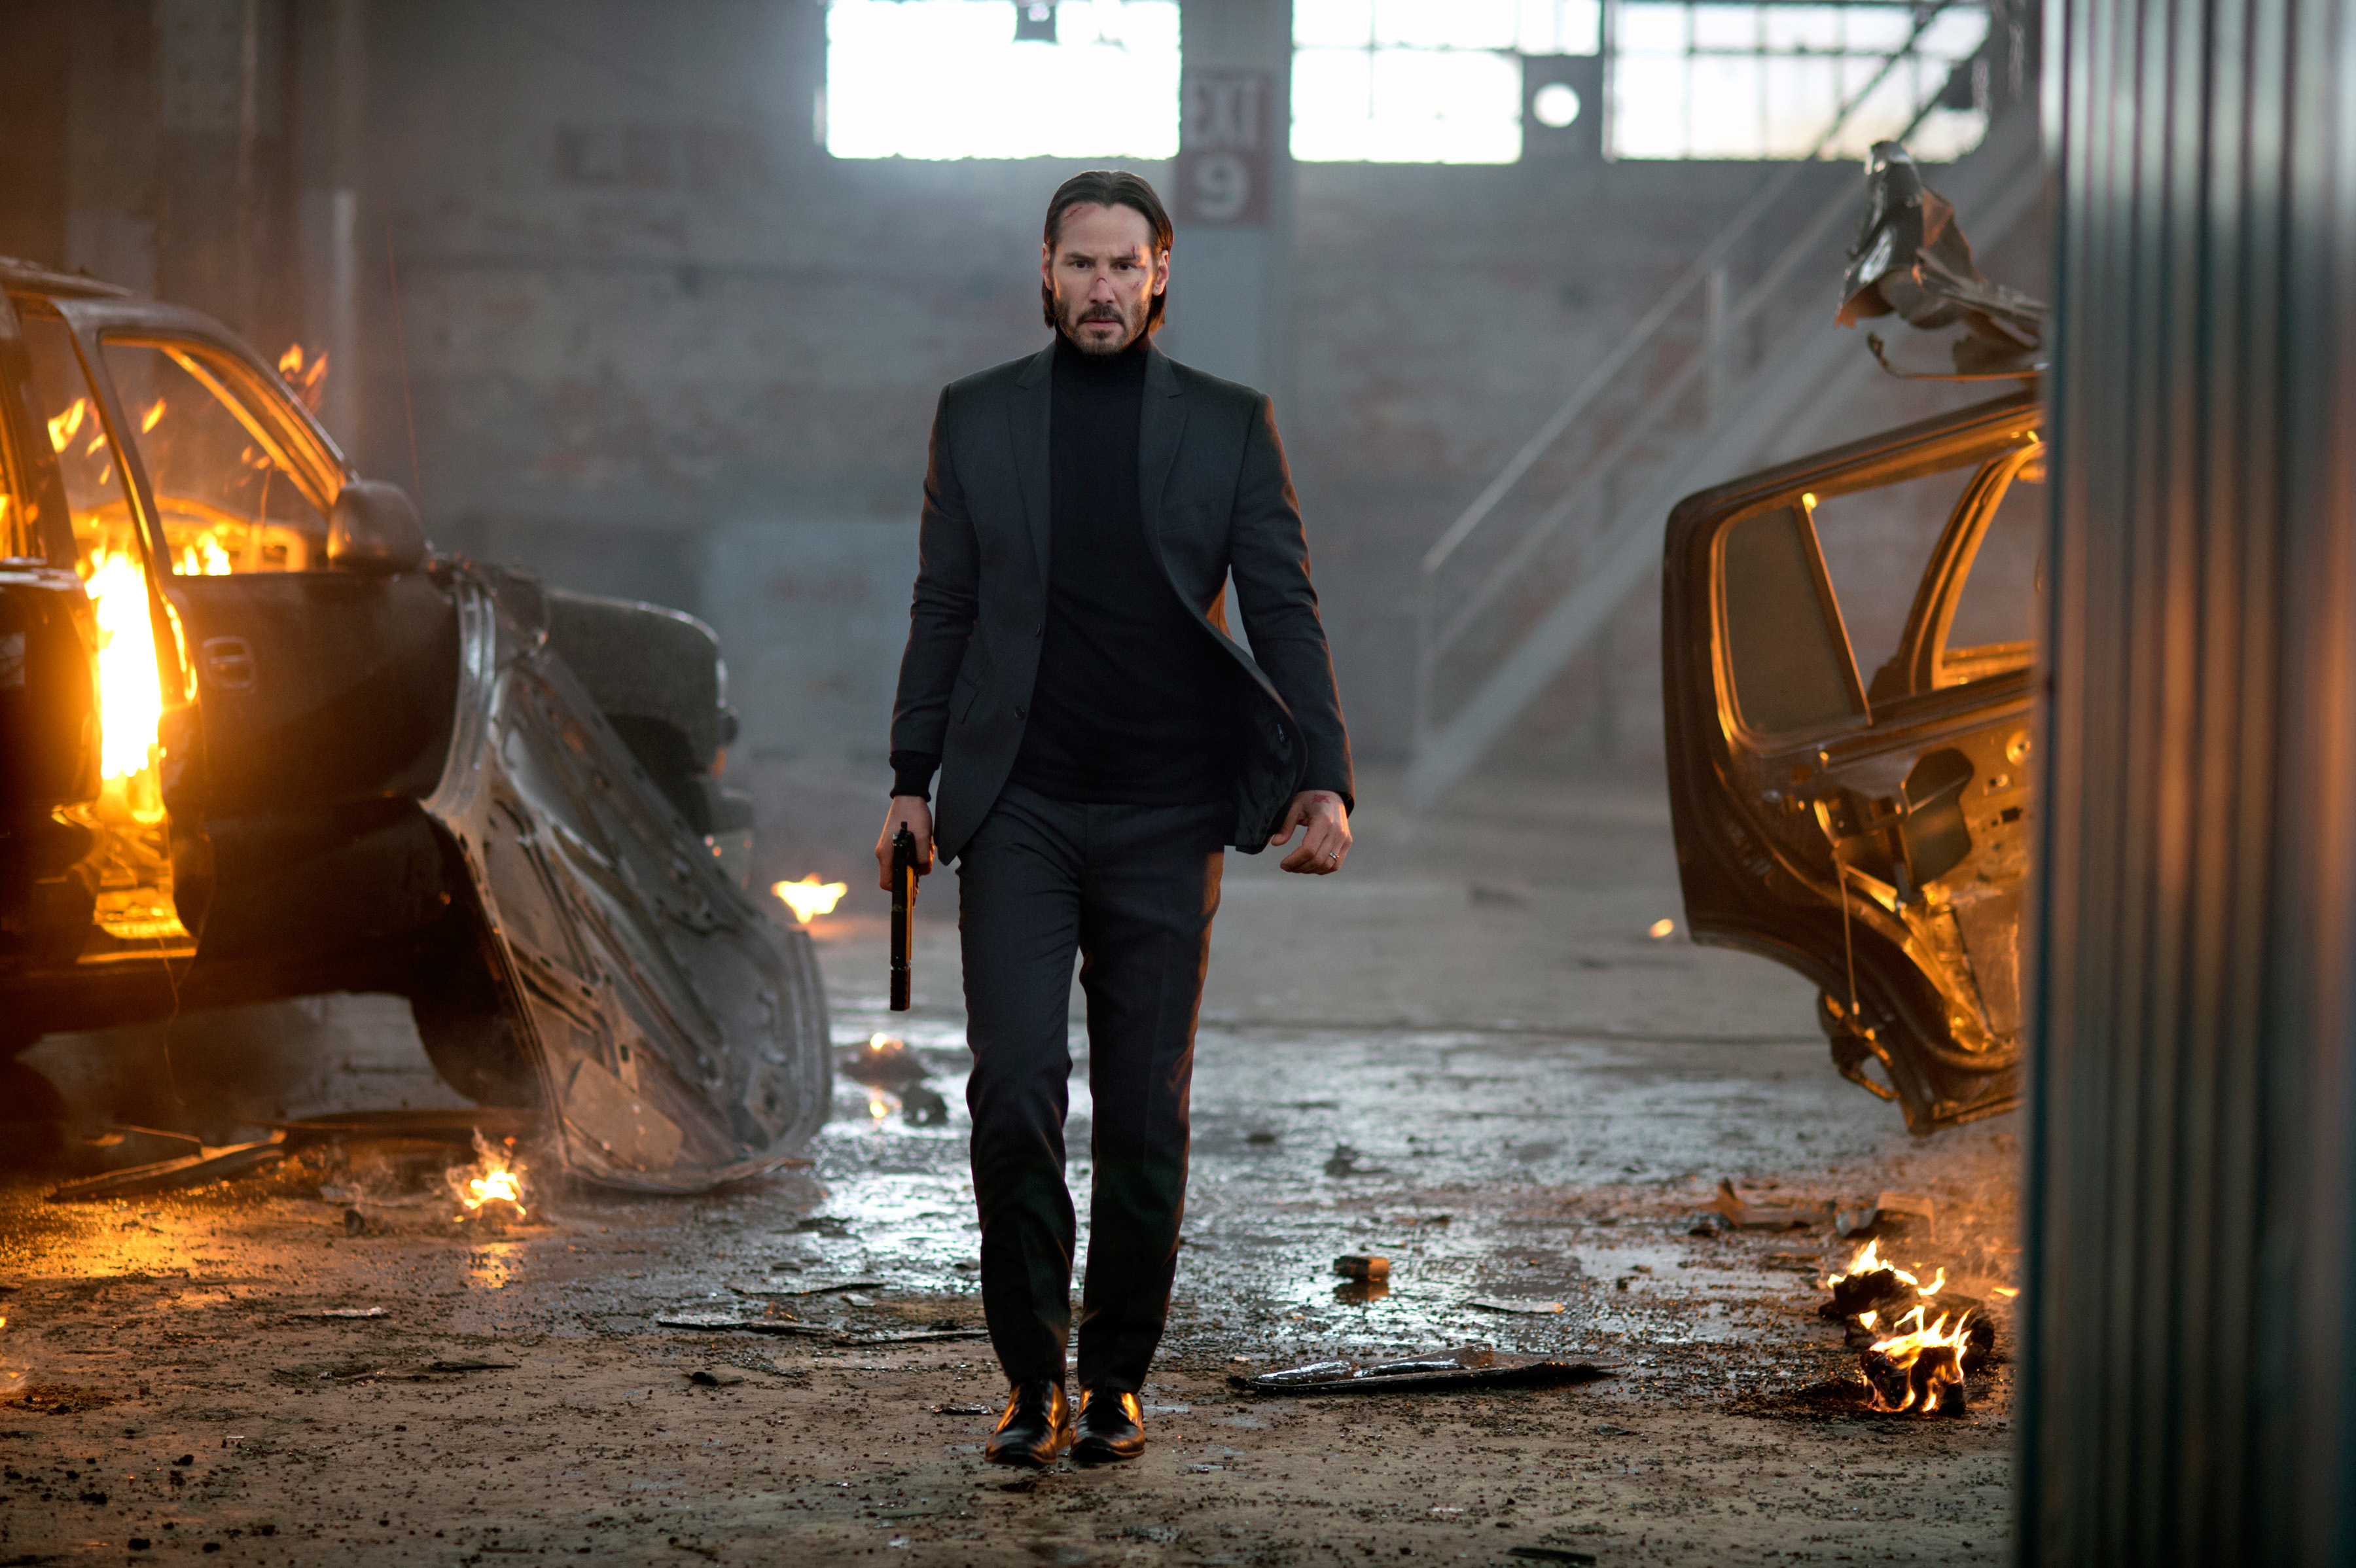 Keanu Reeves as John Wick walking determinedly in a dimly lit space with damaged cars and debris around